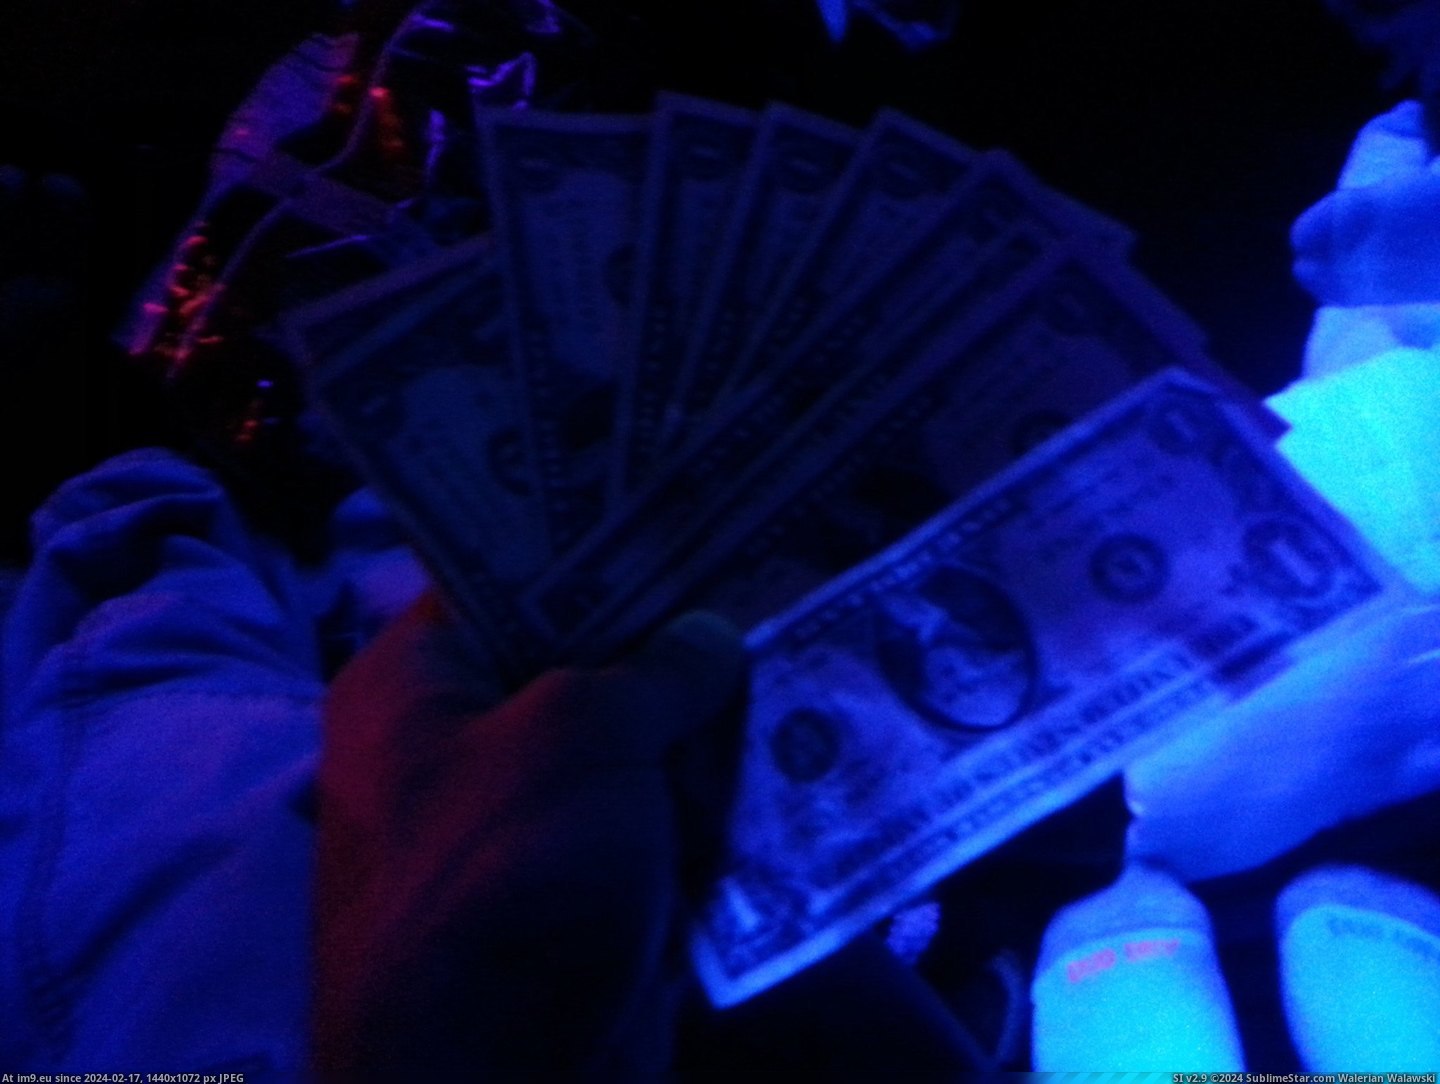 #One #Out #Party #Blacklight #Glowed #Pulled #Handful #Bills [Mildlyinteresting] I pulled out a handful of $1 bills at a blacklight party, and only one glowed. Pic. (Изображение из альбом My r/MILDLYINTERESTING favs))